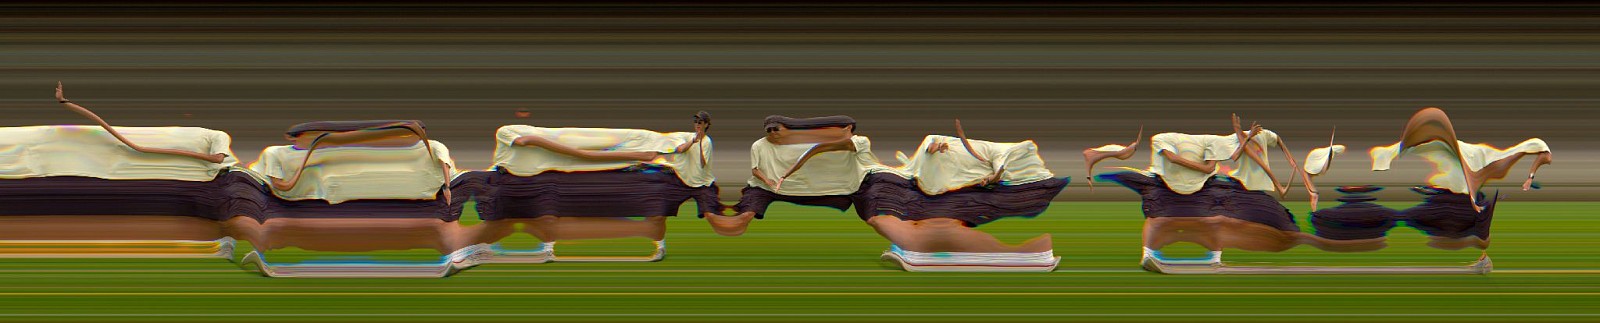 Jay Mark Johnson, TAICHI MOTION STUDY 164, 2005 Los Angeles CA
archival pigment on paper, mounted on aluminum, 40 x 198 in. (101.6 x 502.9 cm)